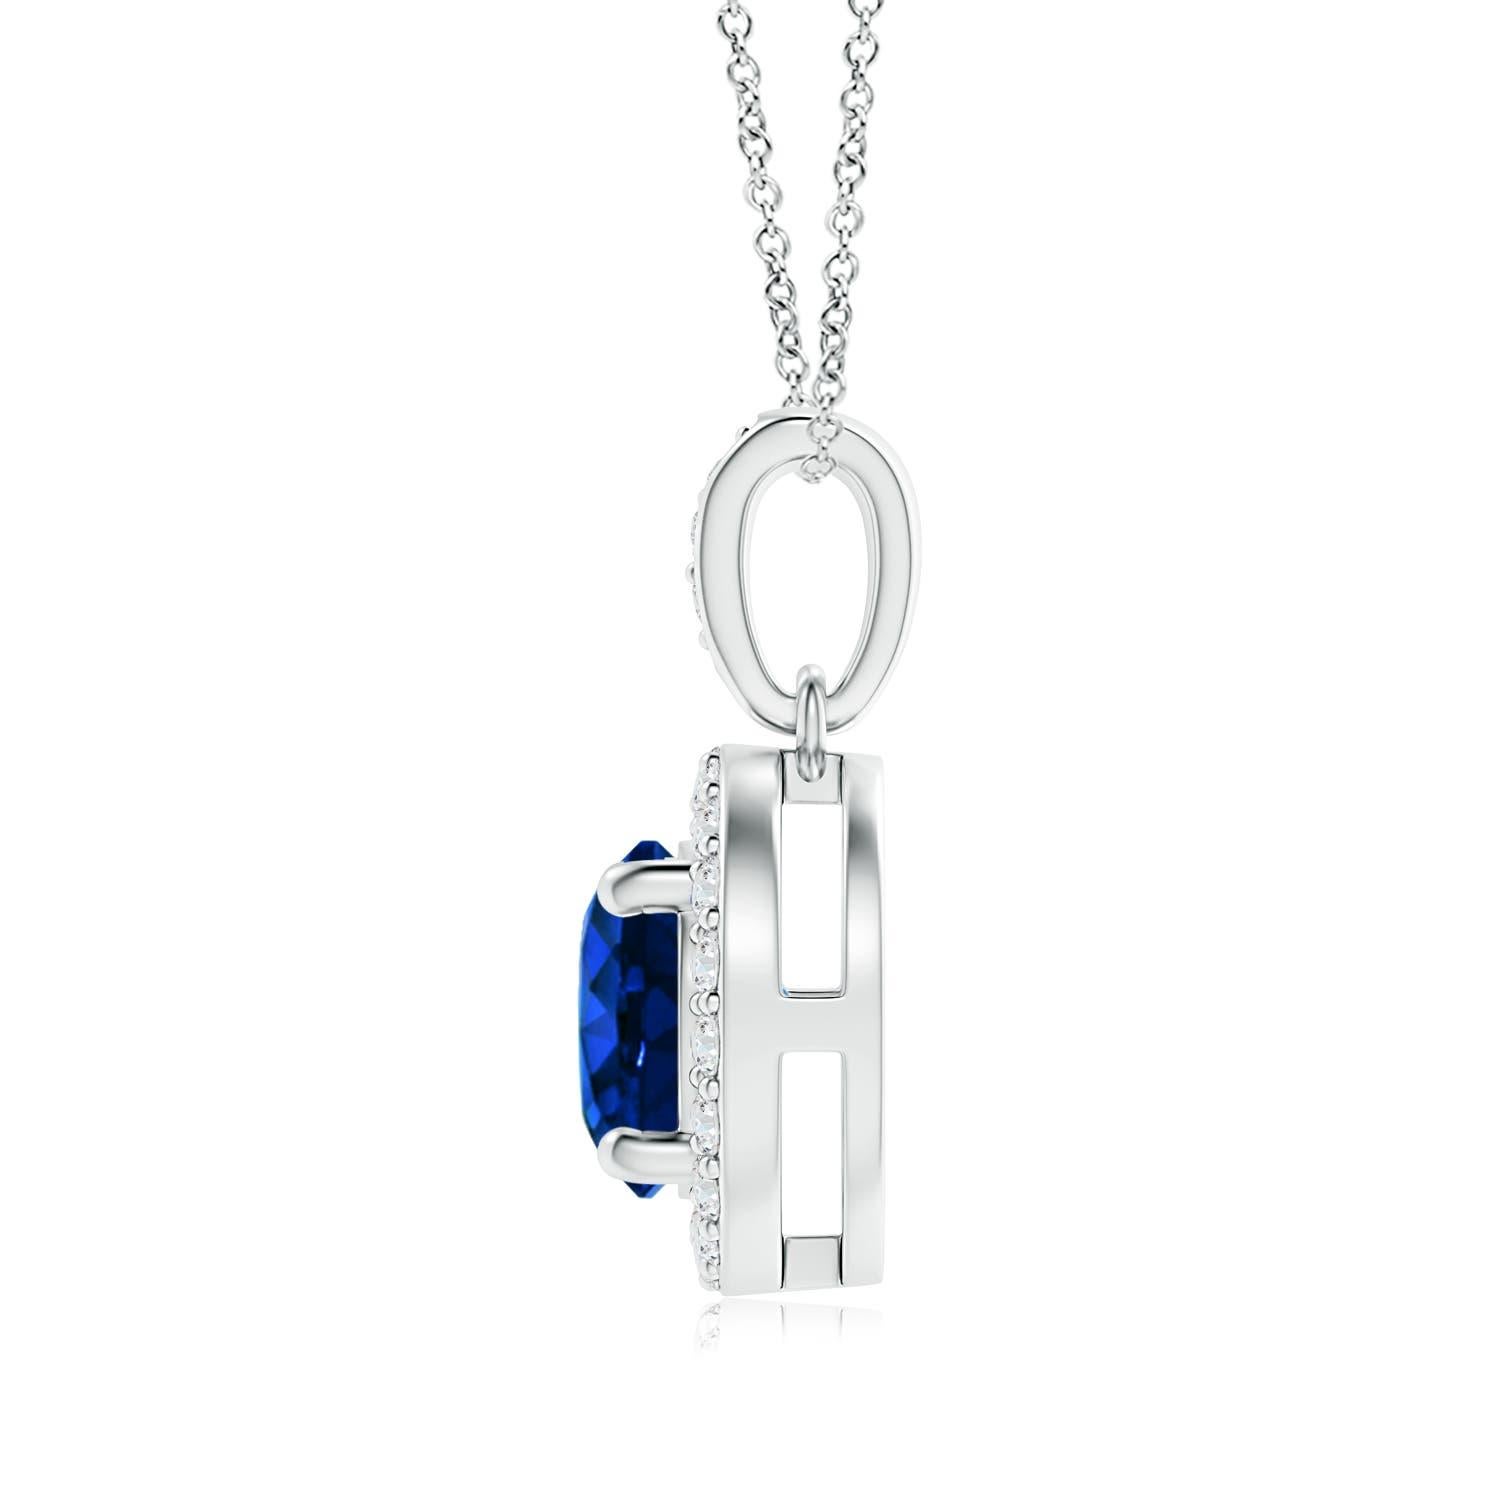 The GIA certified round blue sapphire is held in a prong setting and appears to be floating amid a dazzling diamond halo. There are additional diamond accents on the bale that elevate the elegant look of this 14k white gold pendant.
